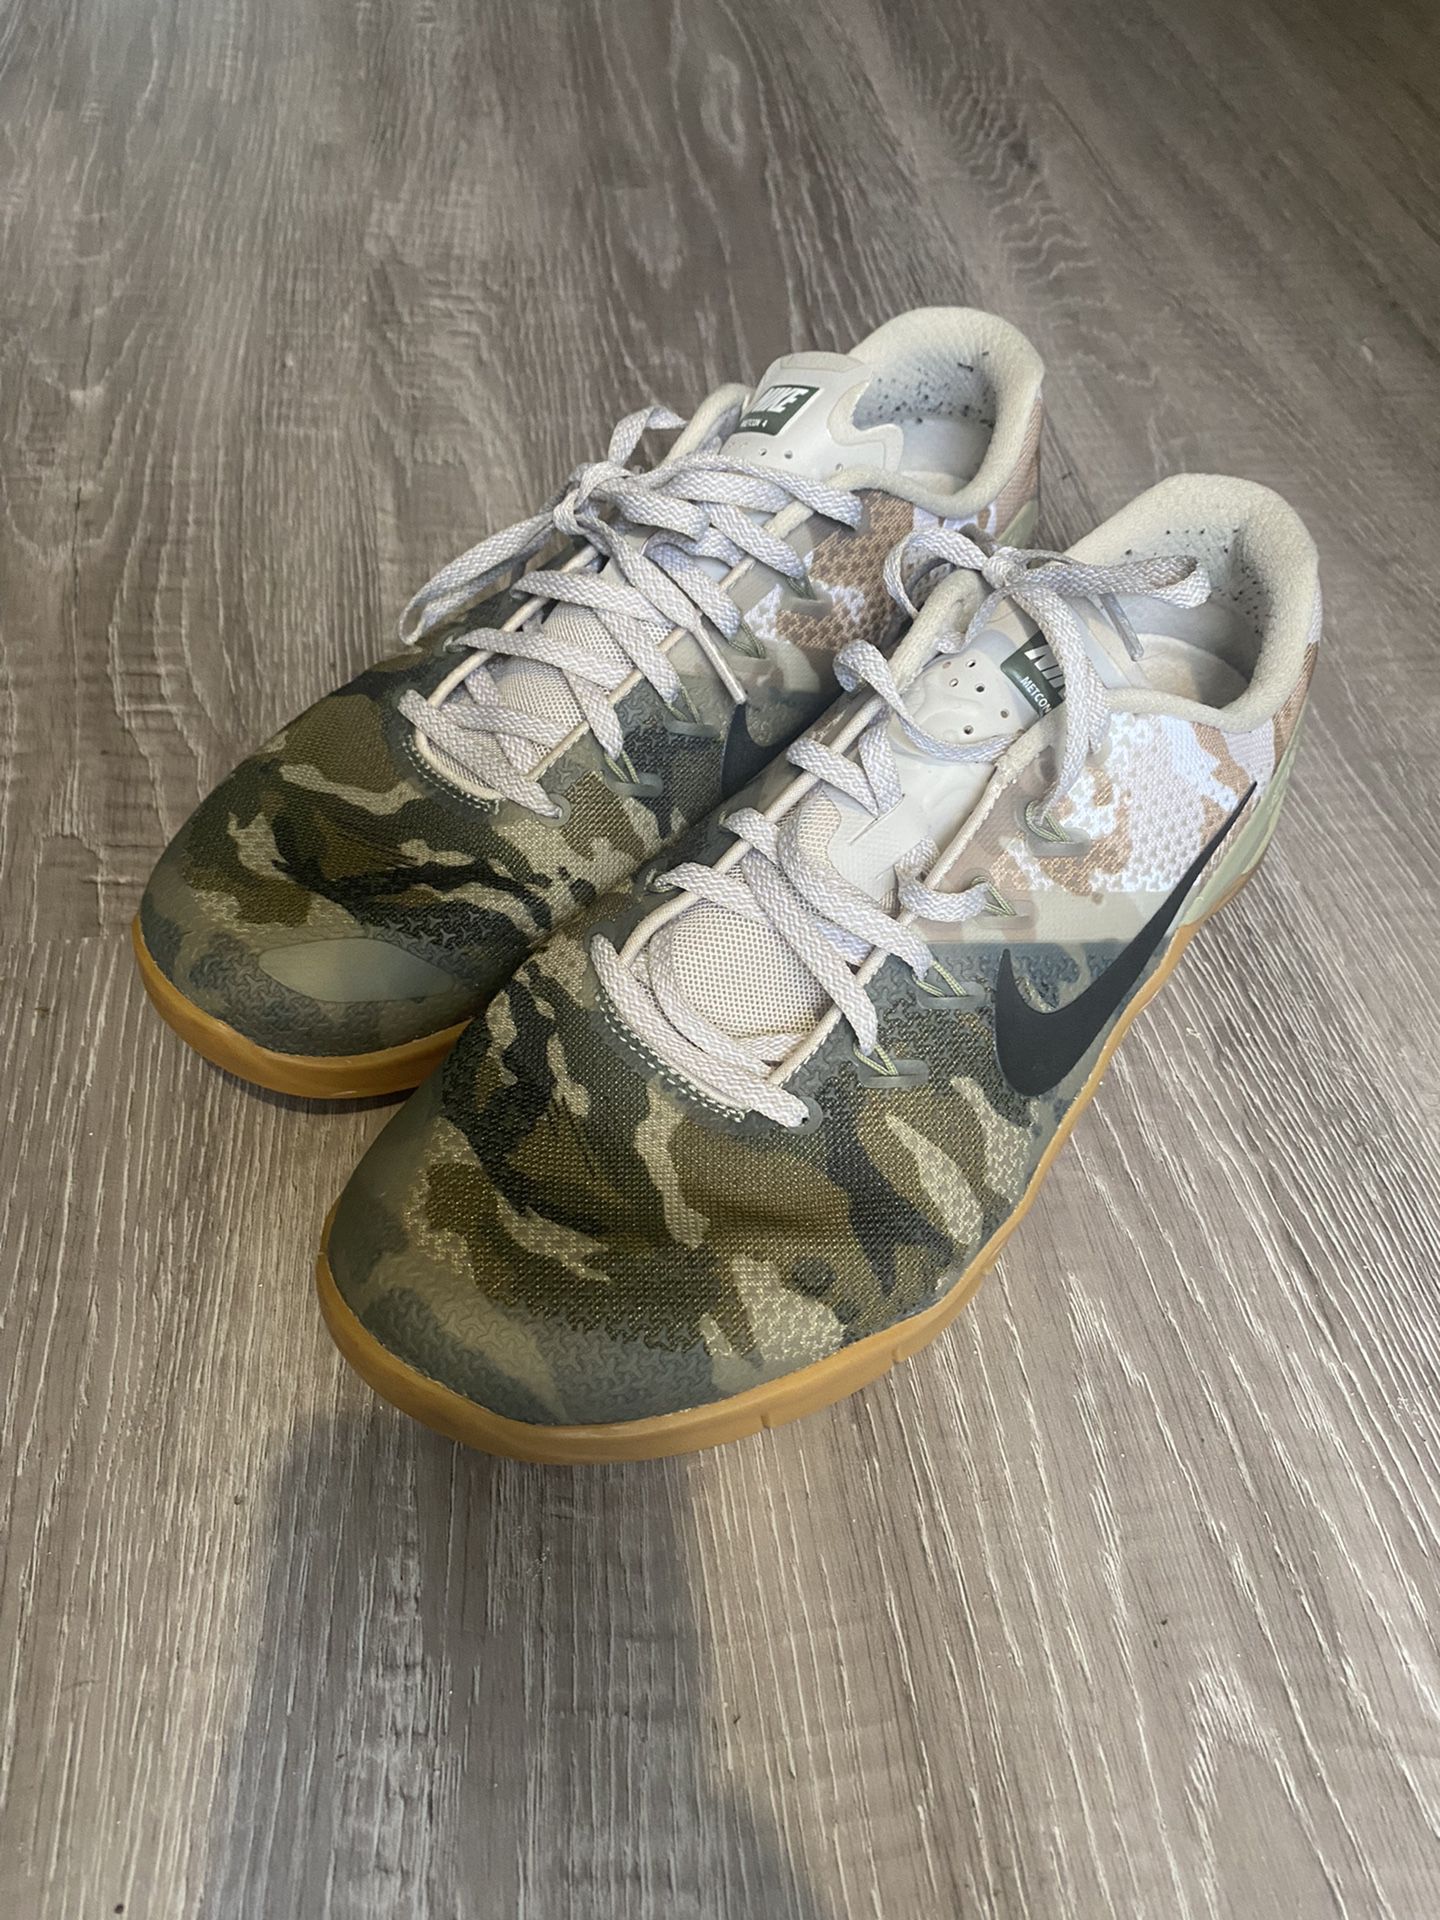 Nike Metcon 4 Olive Canvas Camo AH7453-300 CrossFit Shoes Size 11.5 for Sale in FL - OfferUp